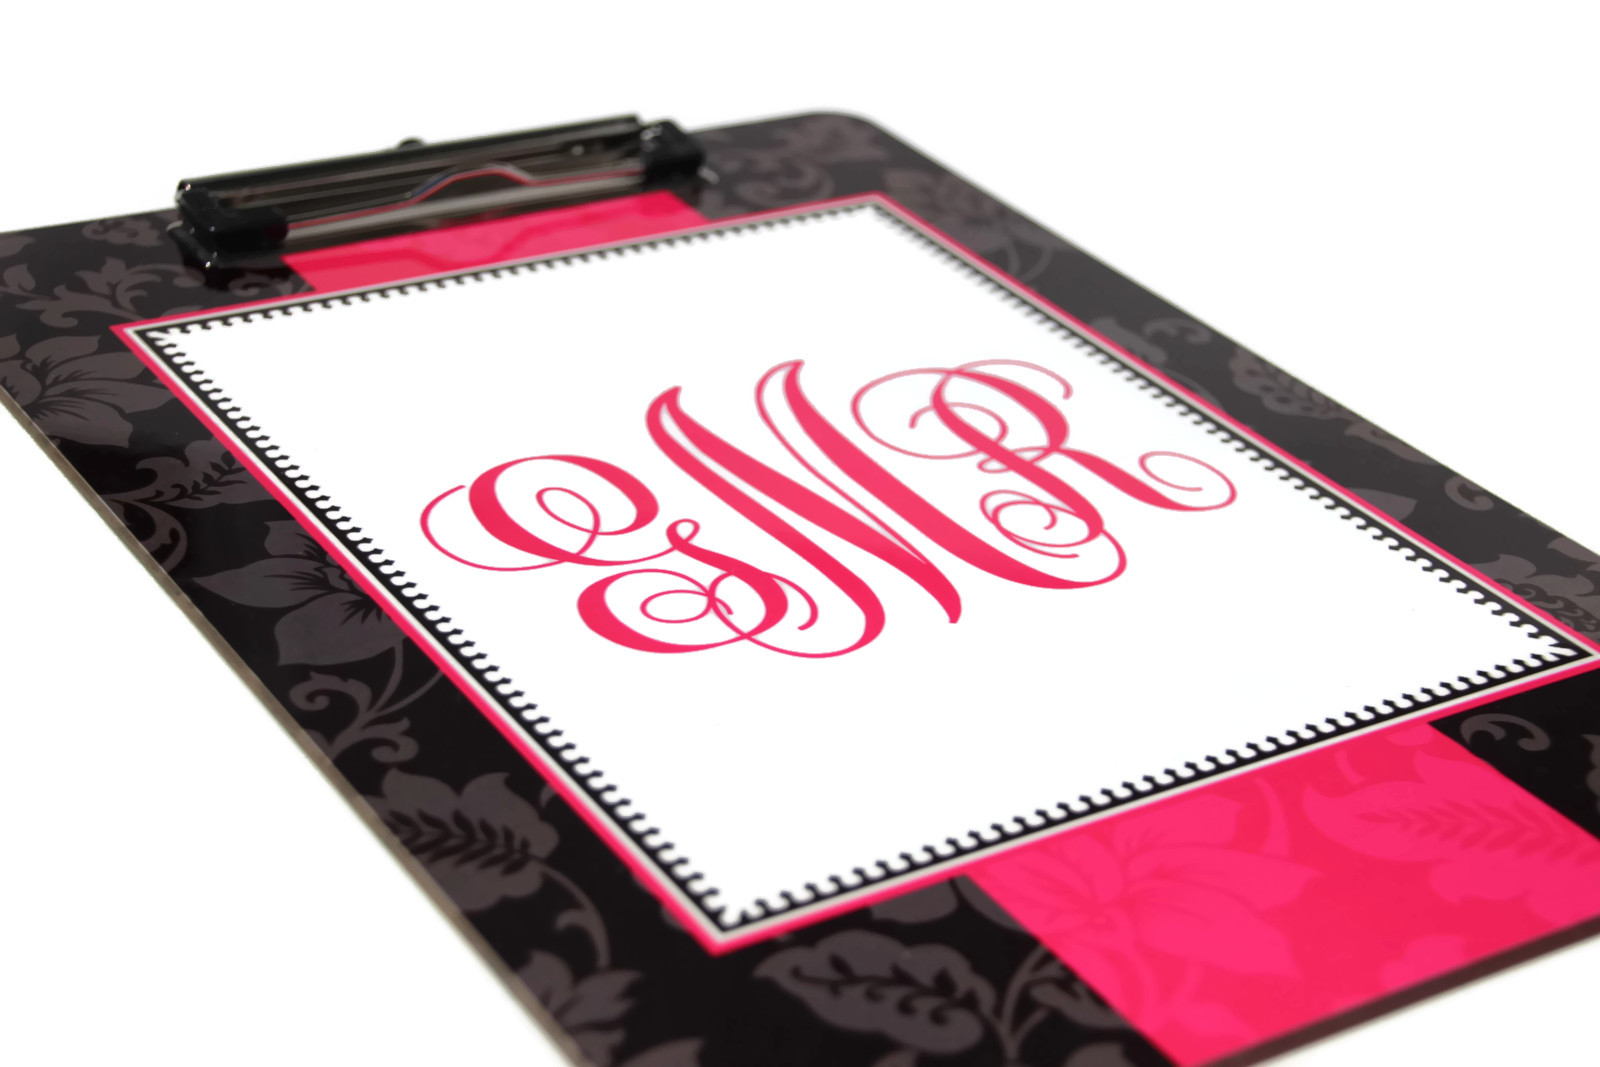 Monogrammed Clipboard made with sublimation printing